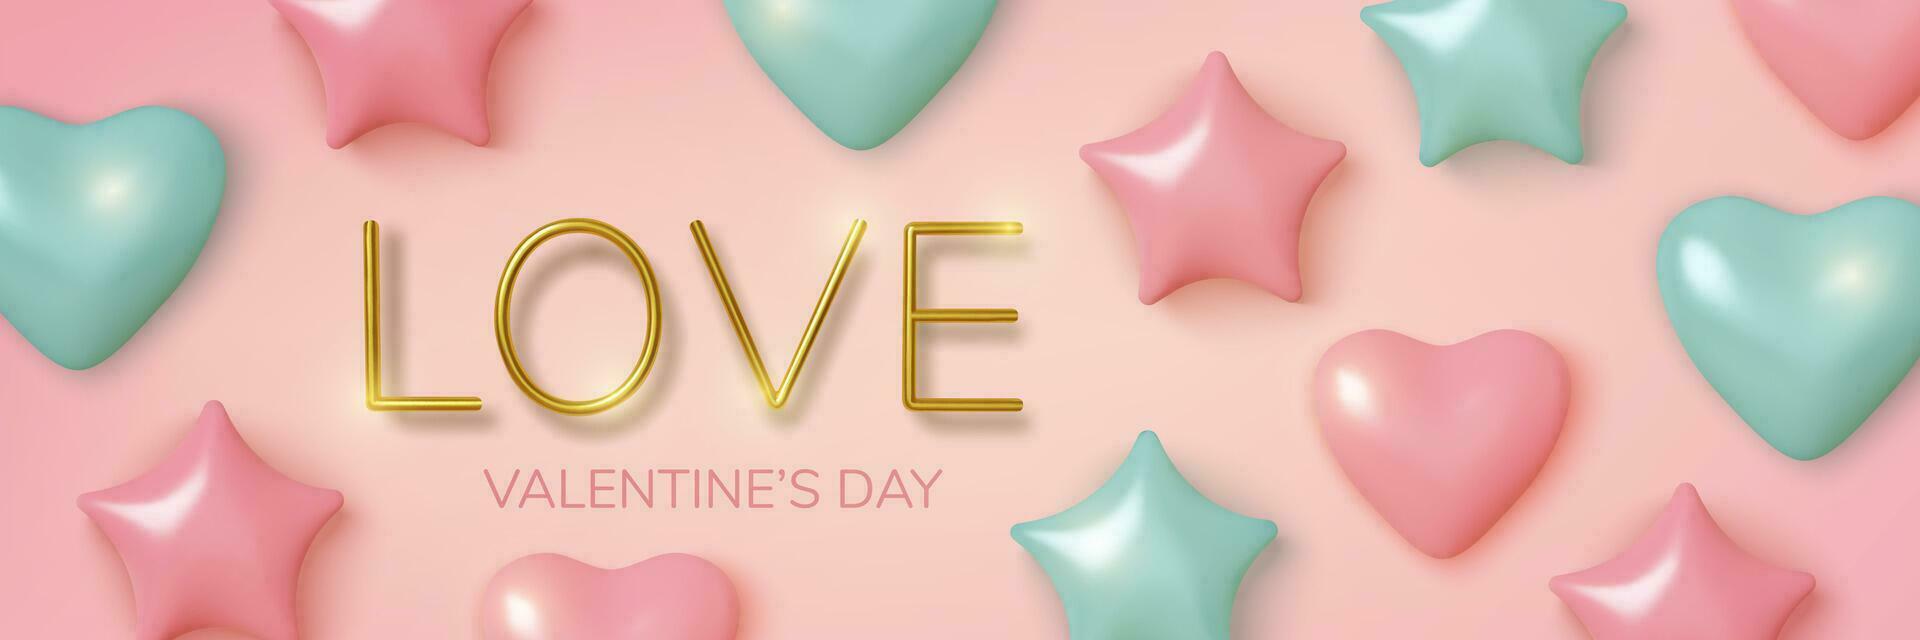 Valentines Day greeting card. Realistic 3d pink and blue balloons hearts and stars. Love and wedding. Template for products, web banners and leaflets. Vector illustration